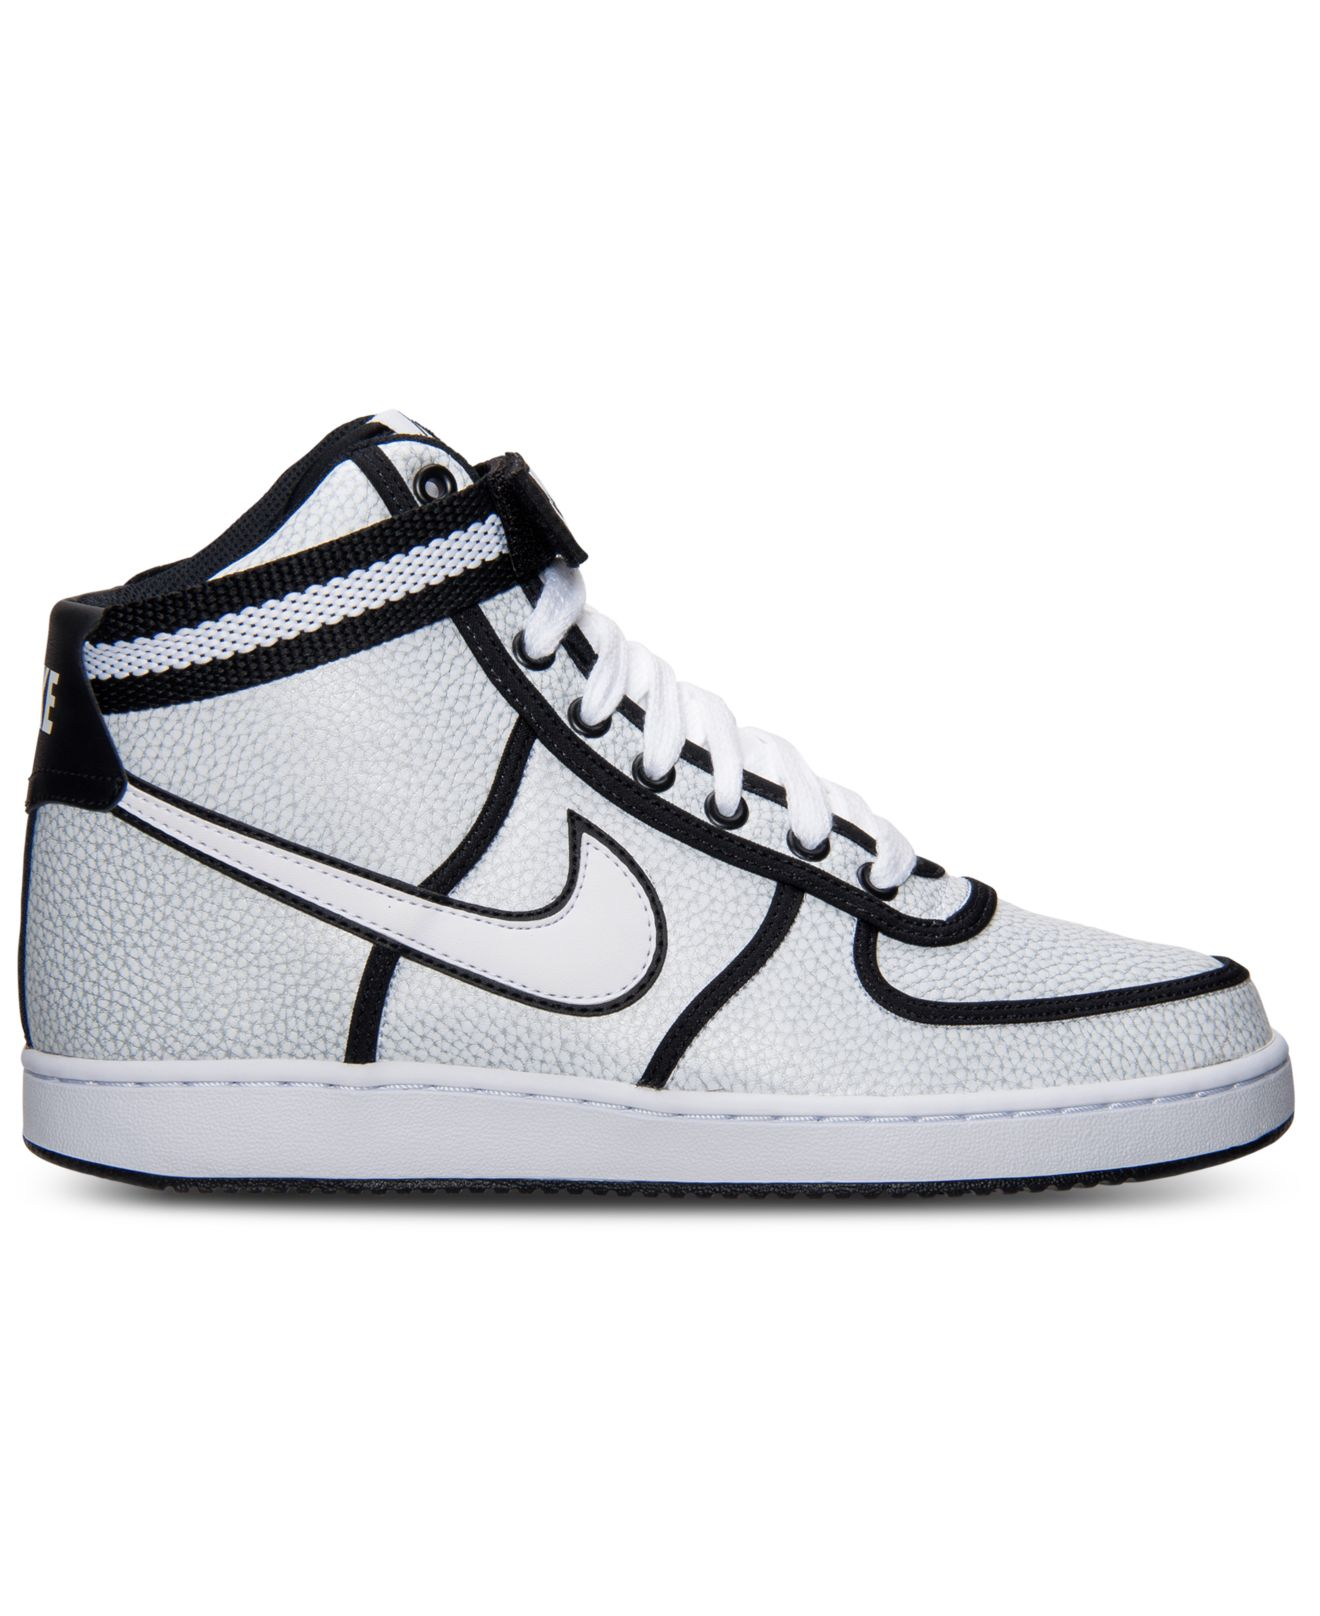 Lyst - Nike Men'S Vandal High Casual Sneakers From Finish Line in Black